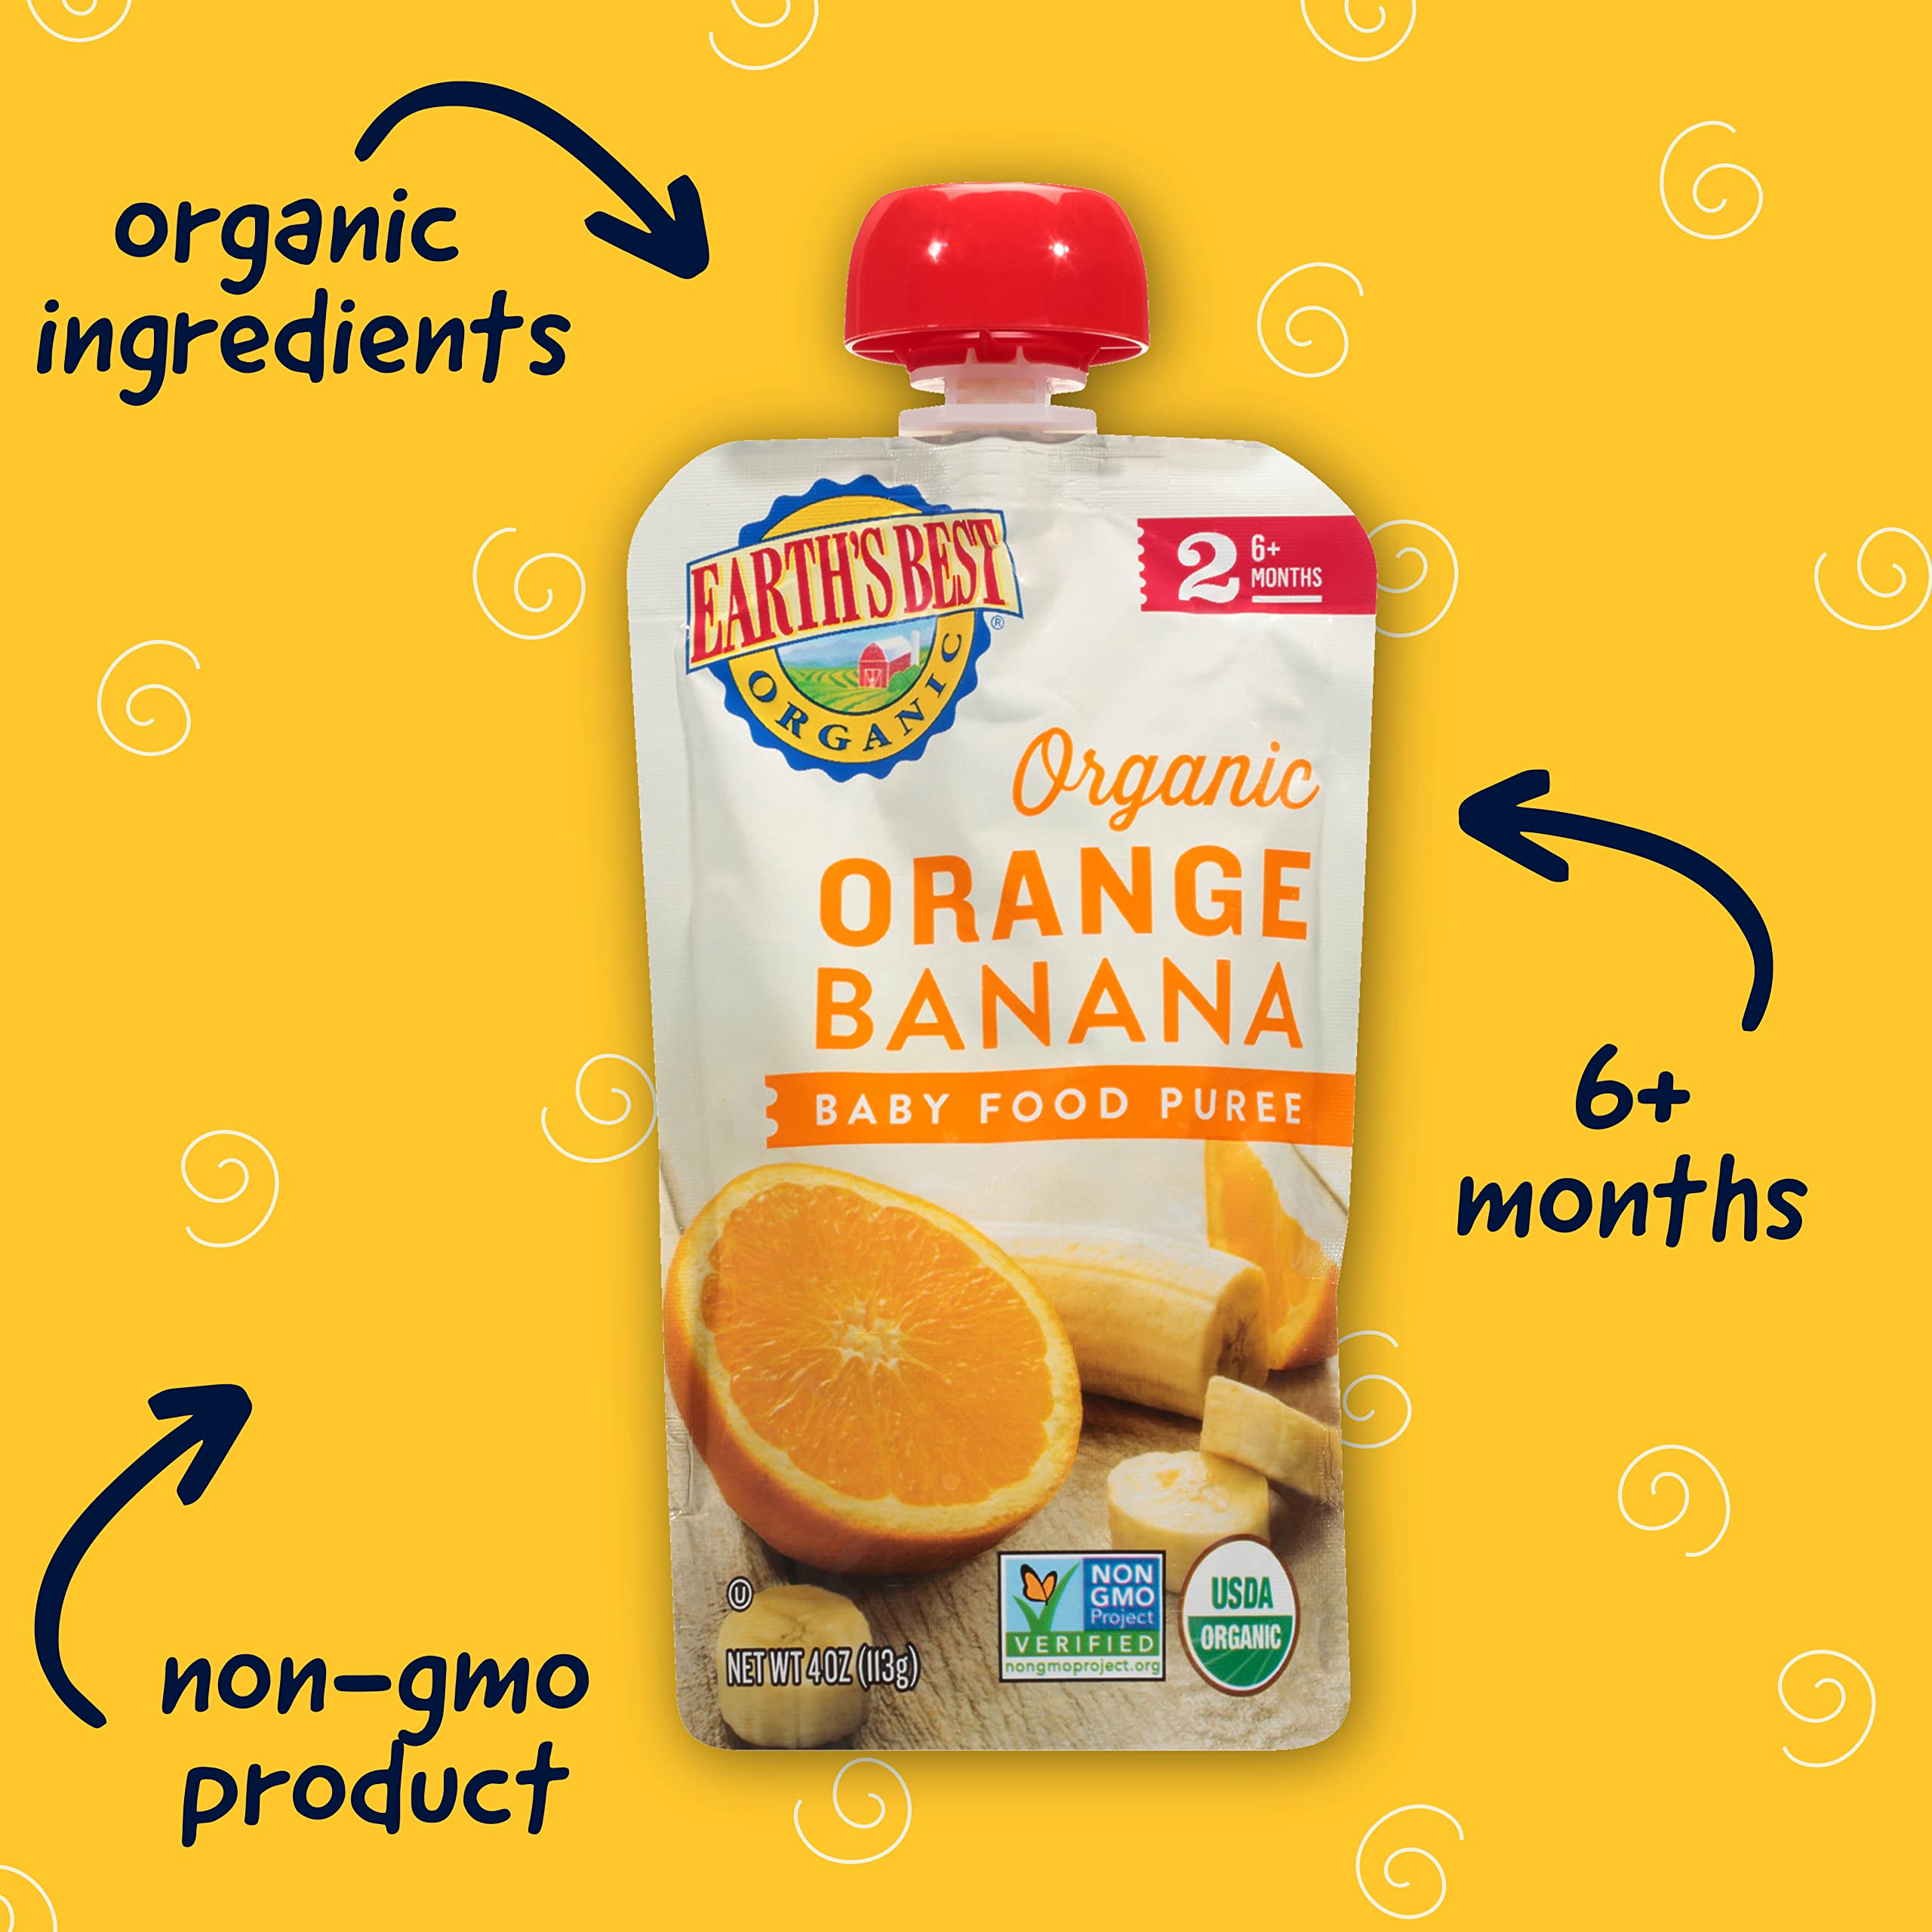 Earth's Best Organic Baby Food Pouches, Stage 2 Fruit Puree for Babies 6 Months and Older, Organic Orange and Banana Puree, 4 oz Resealable Pouch (Pack of 8)